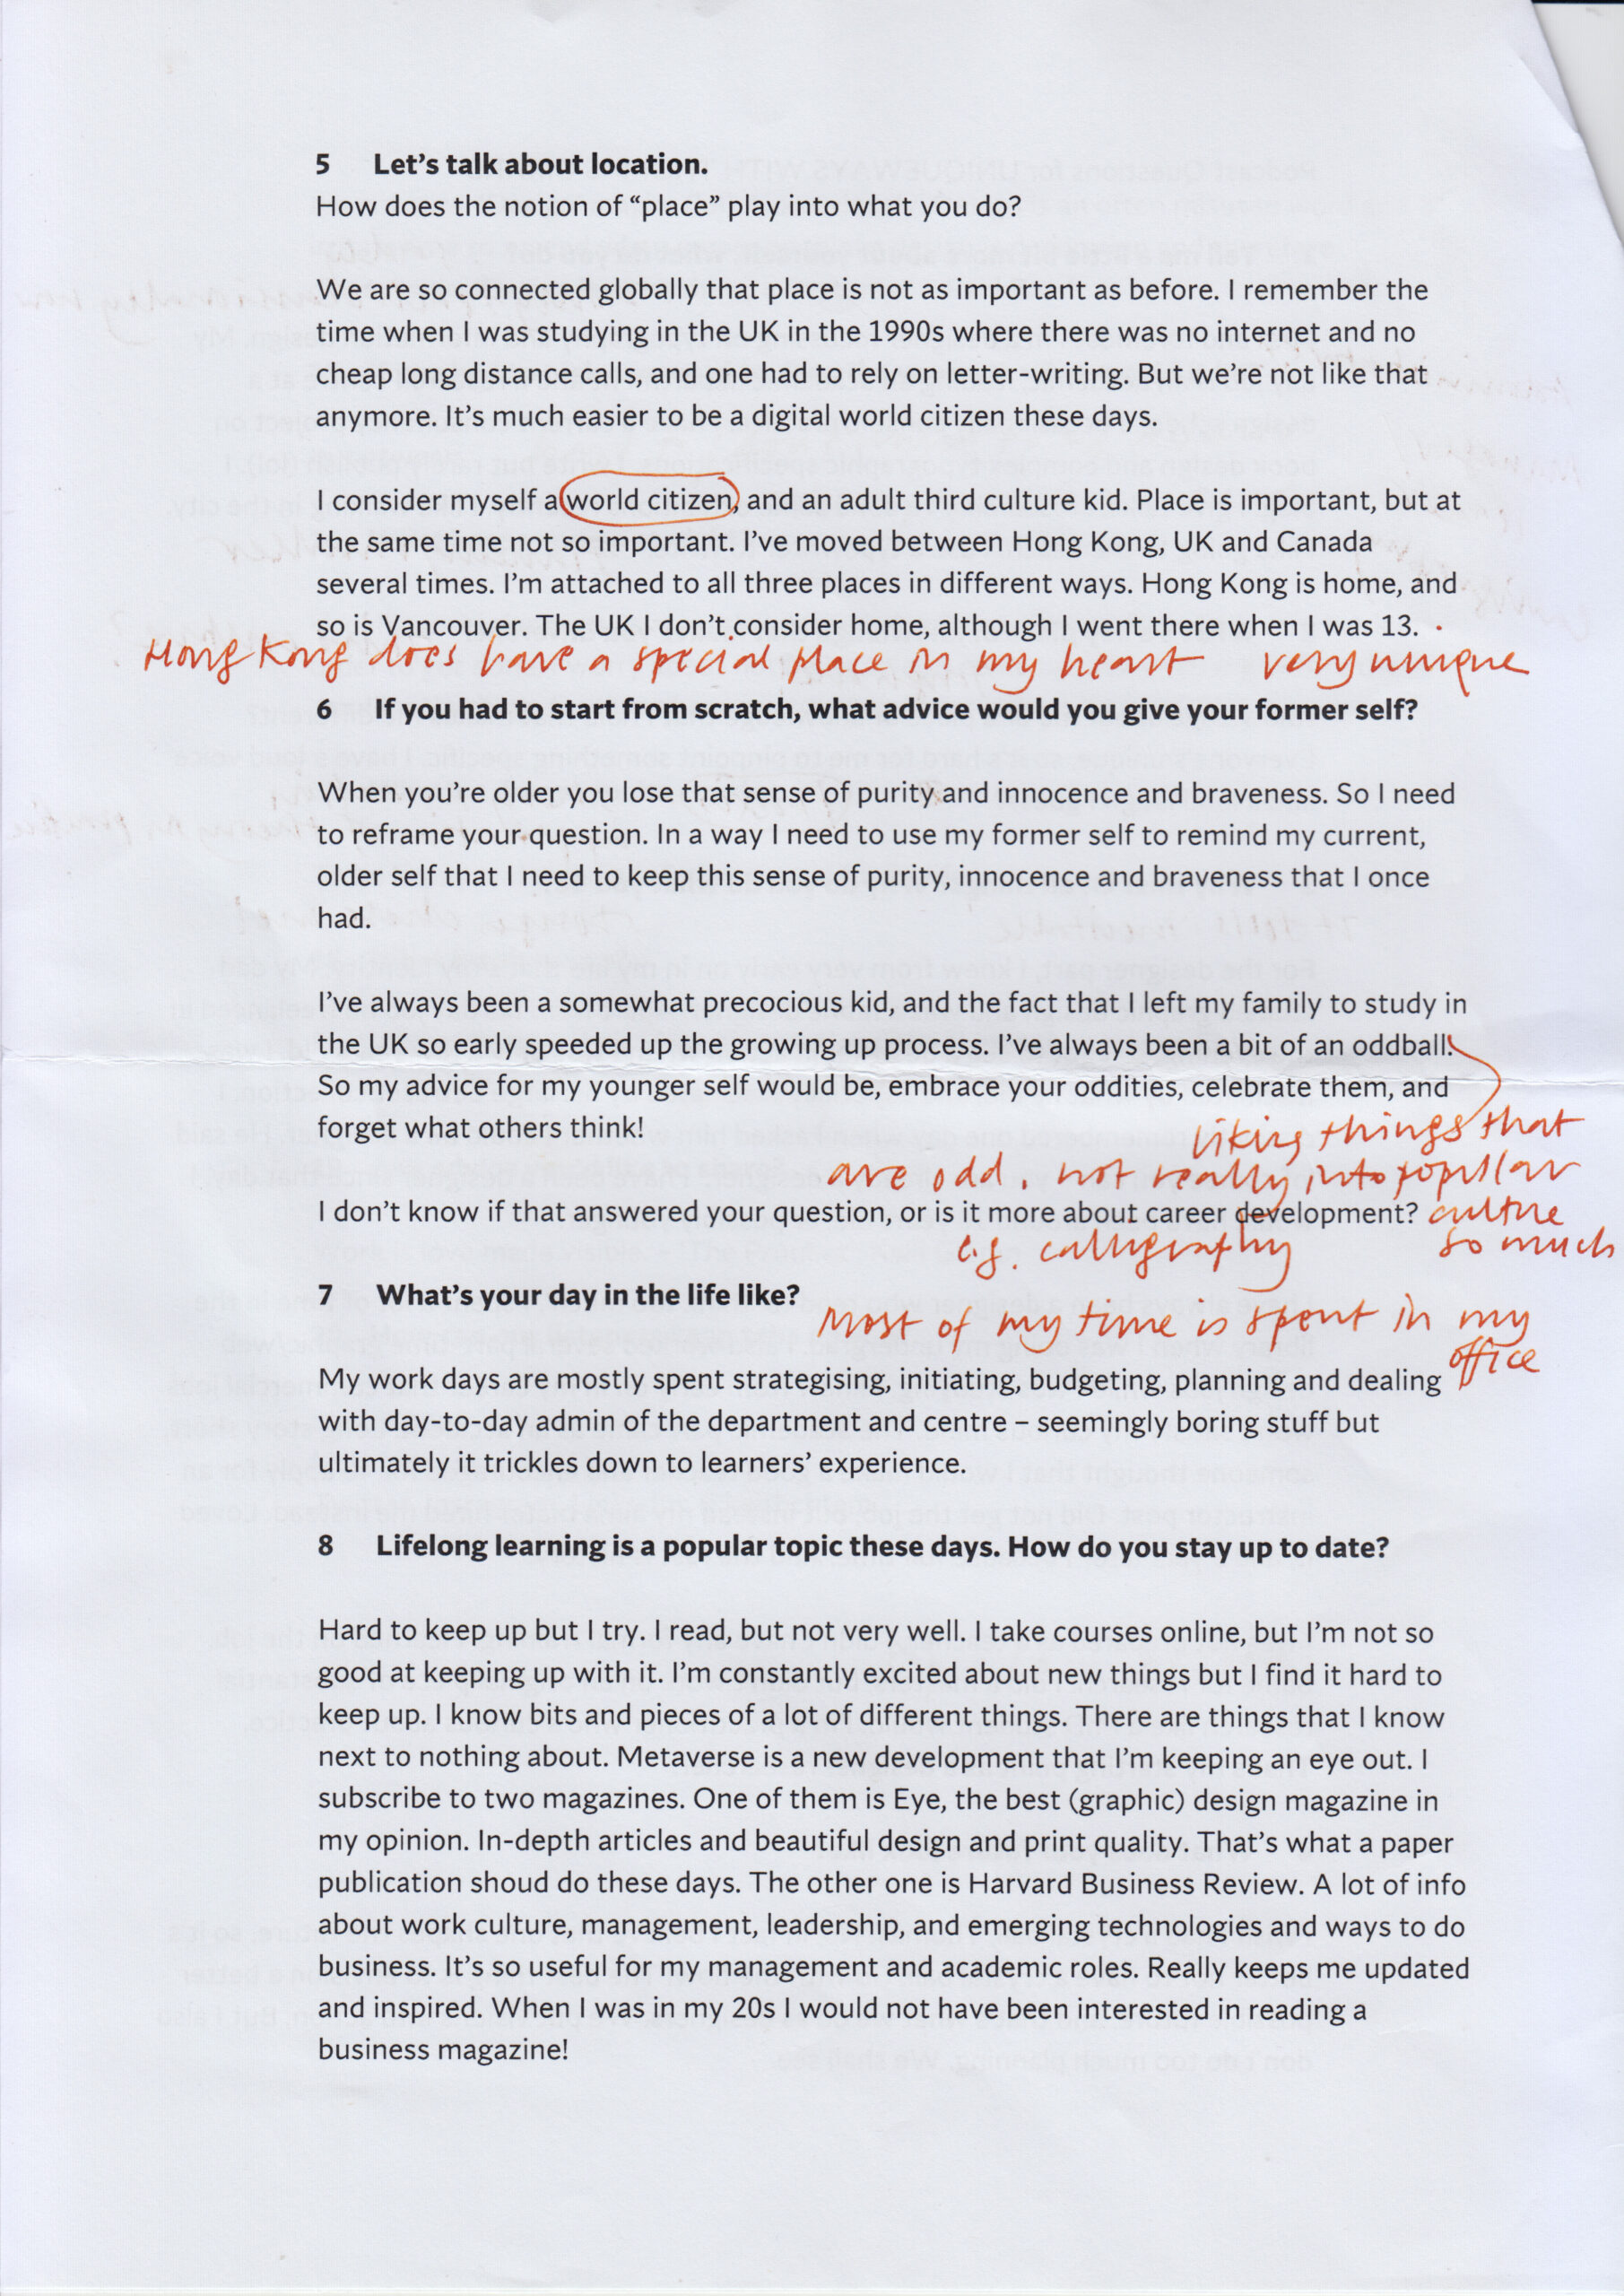 An A4 laser printed page containing text in black with handwritten annotations written in burnt orange ink. Part of a four-page document stapled together in the top left corner.